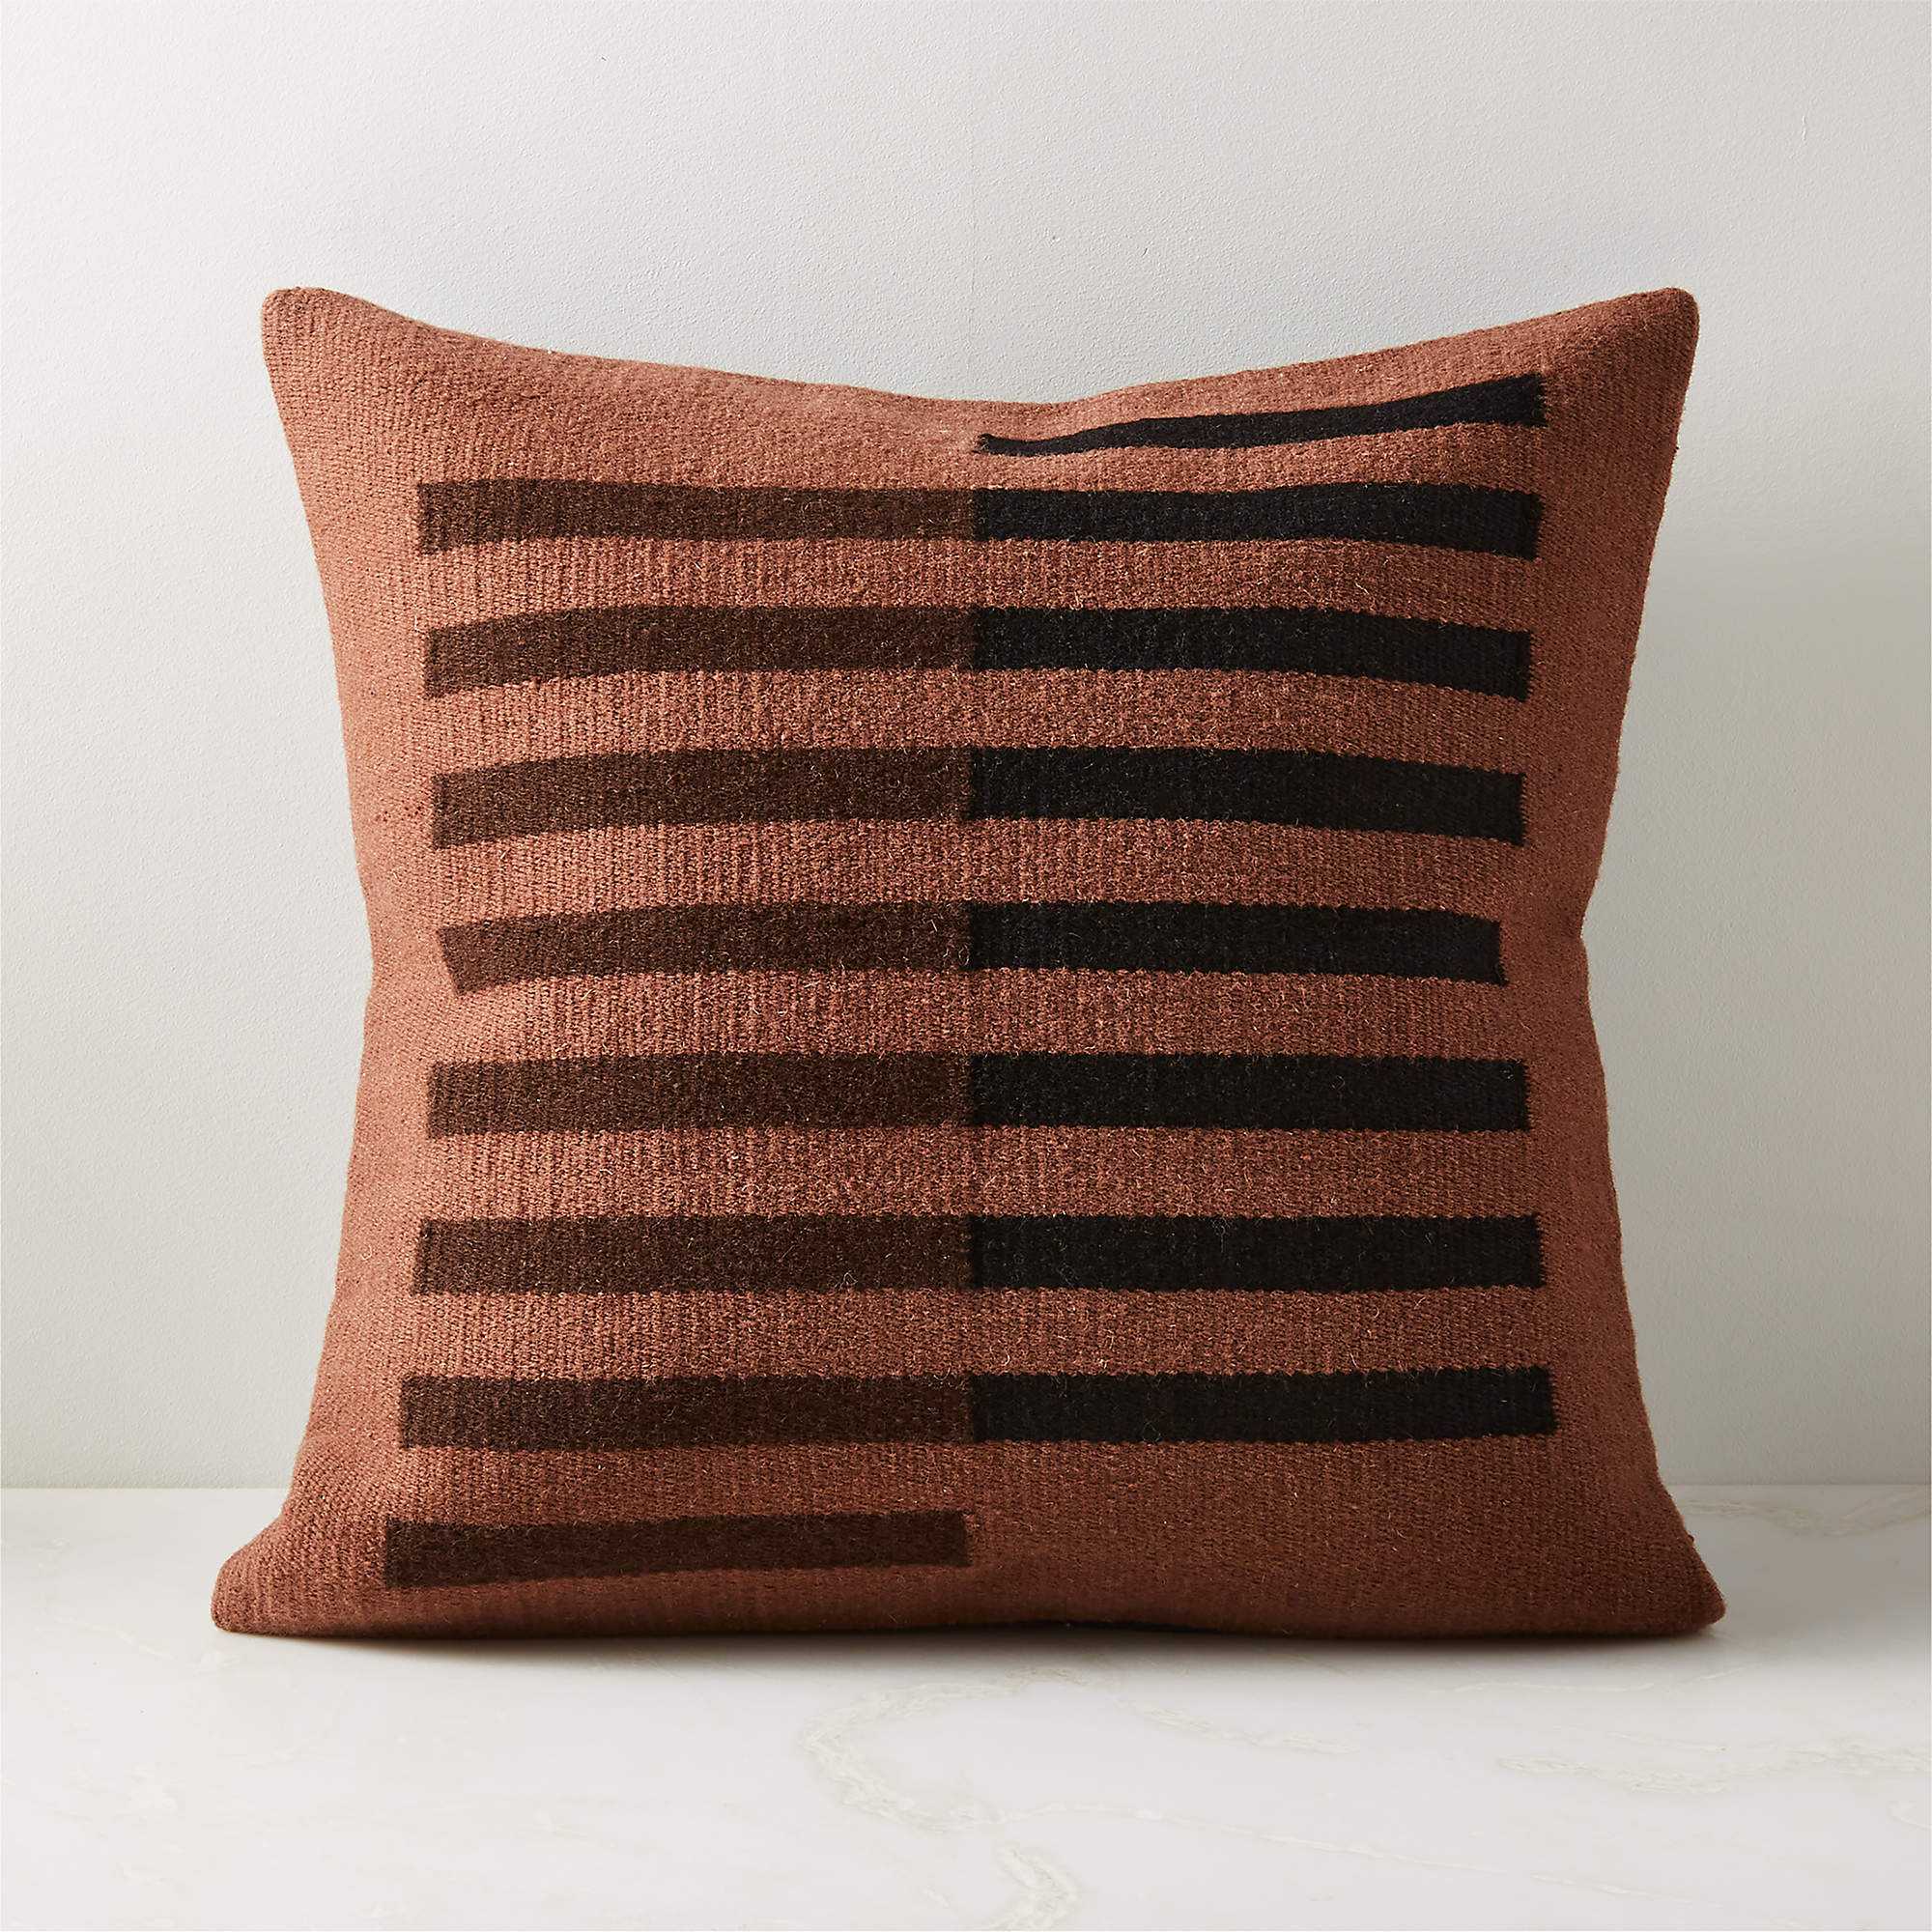 Shop Rhava Woven Brown Throw Pillow with Insert 20 from CB2 on Openhaus